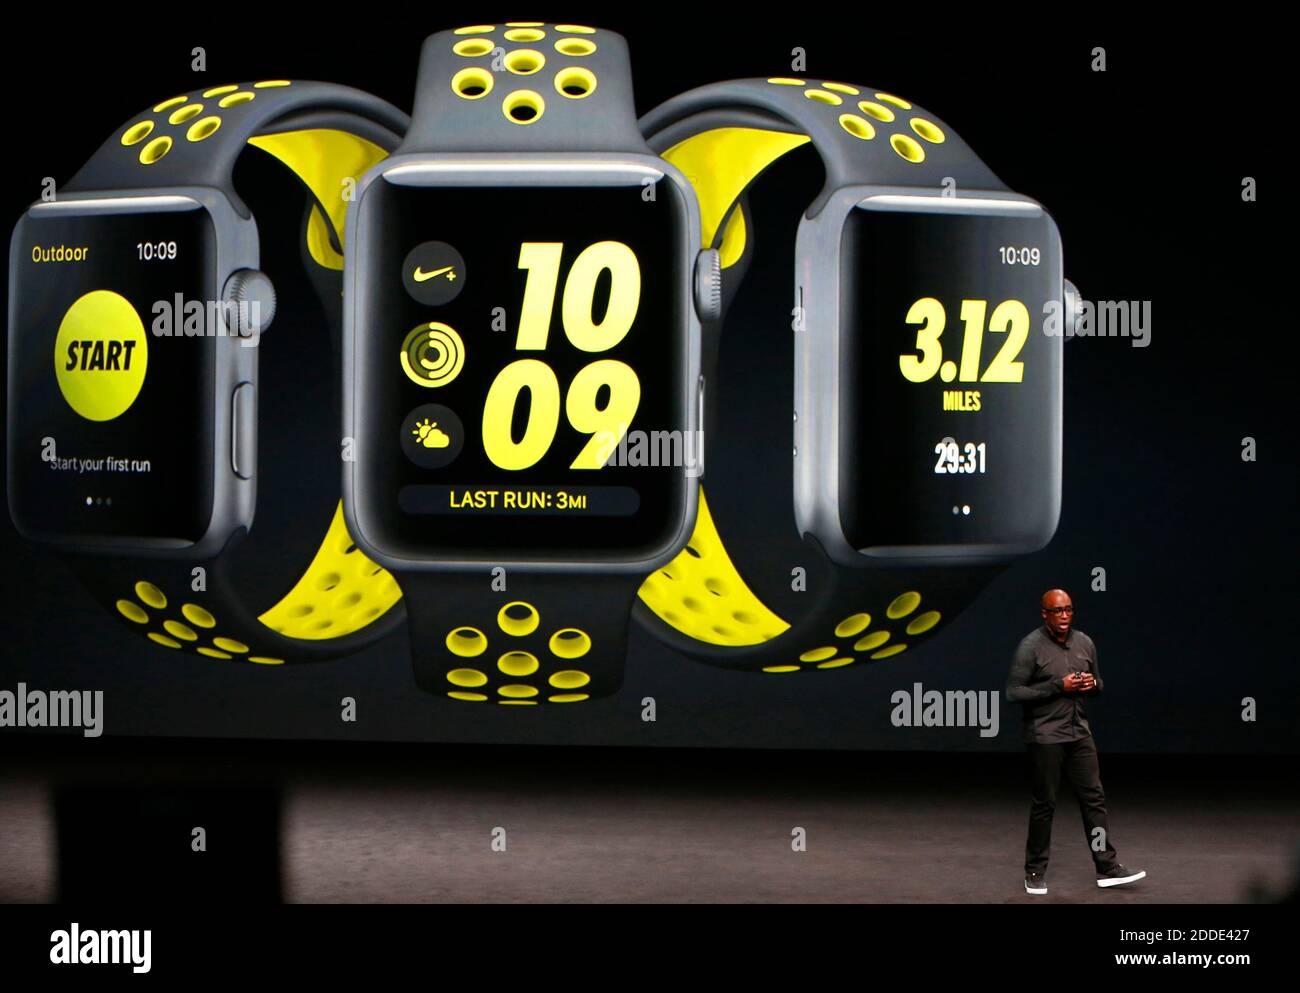 NO FILM, NO VIDEO, NO TV, NO DOCUMENTARY - Nike president Trevor Edwards  talks about the new Nike Apple watch during a product launch at the Bill  Graham Civic Auditorium in San